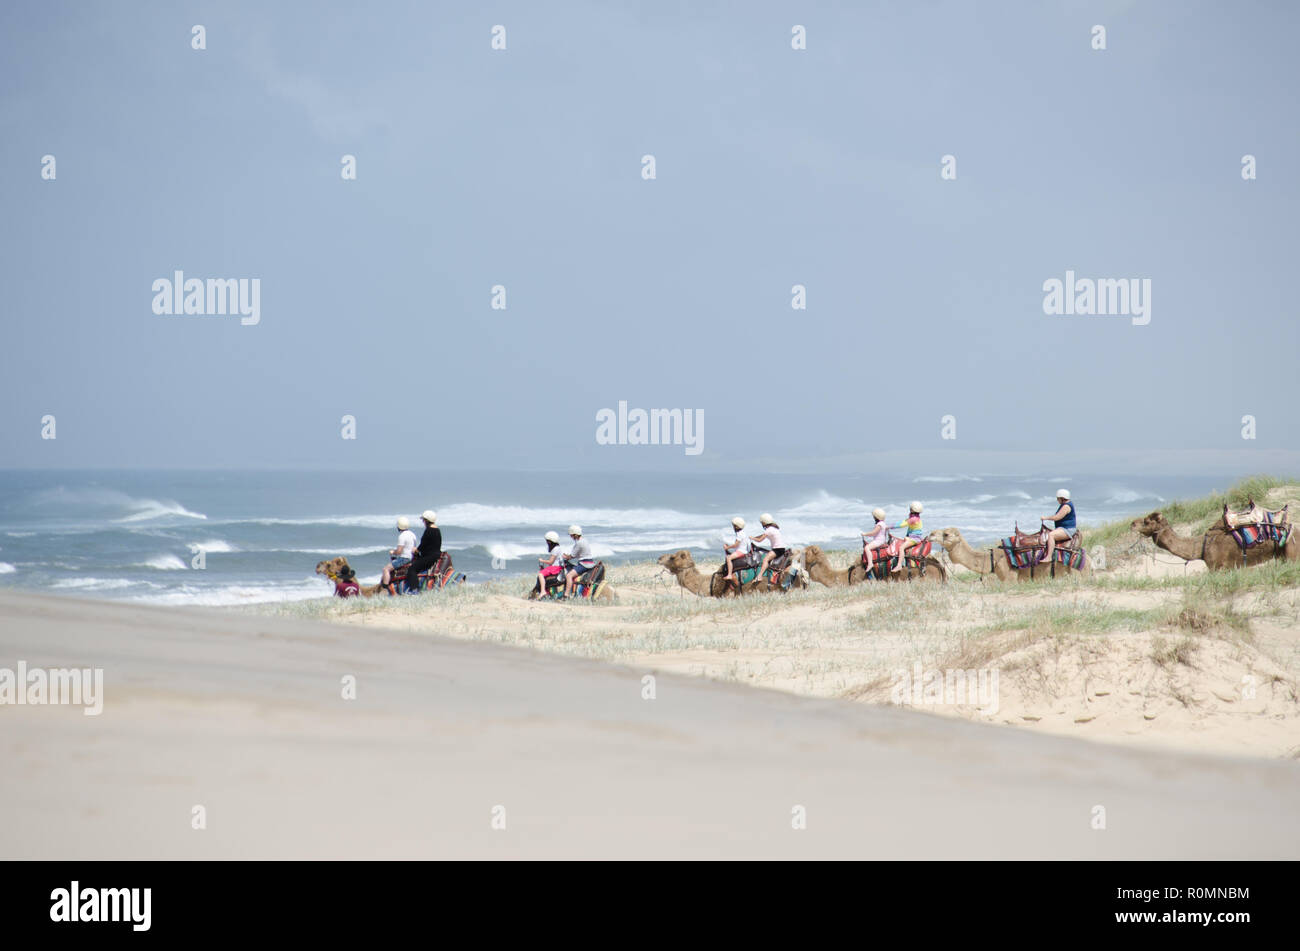 Camel riders leave the barren sand dunes for the beach front water edge during a camel ride for tourist on Stockton Beach sand dunes. Stock Photo